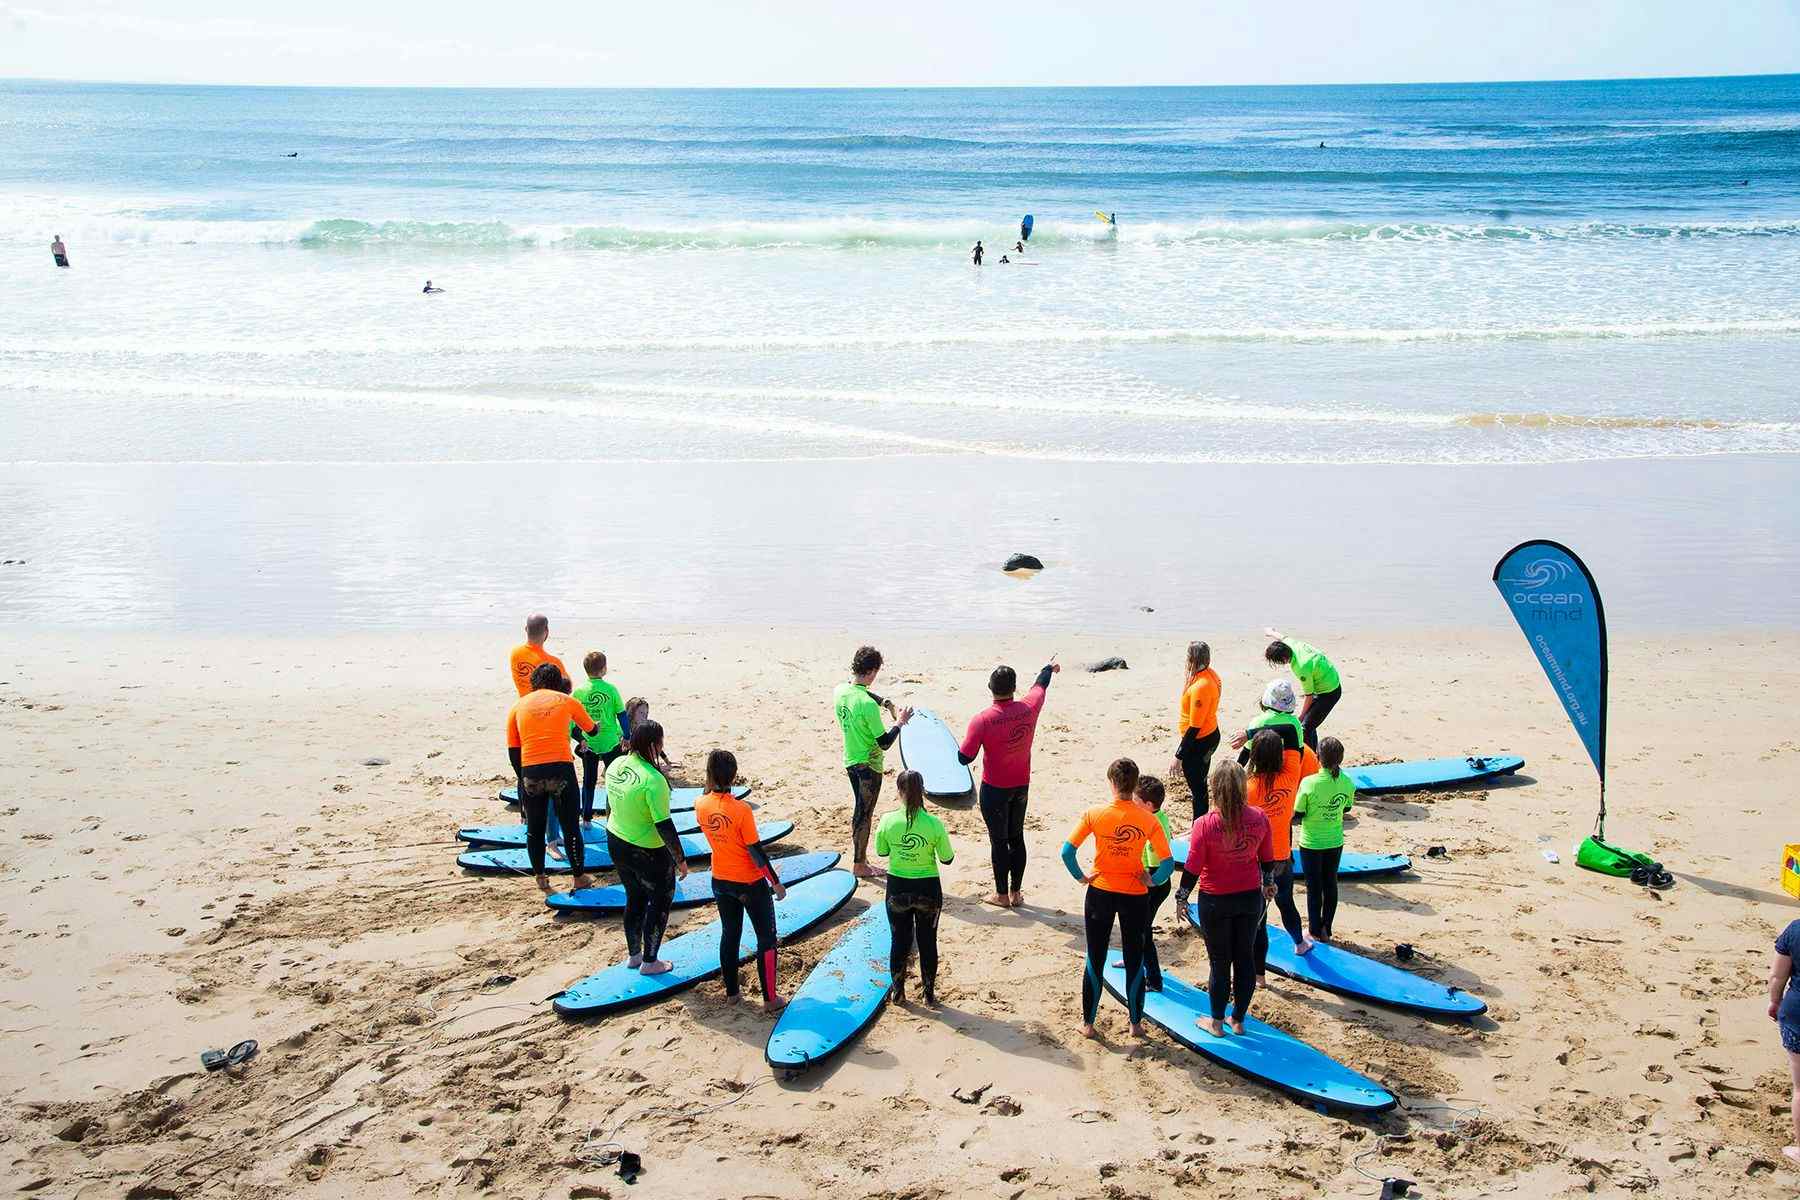 surf session in victoria, australia run by therapeutic surfing charity Ocean Mind